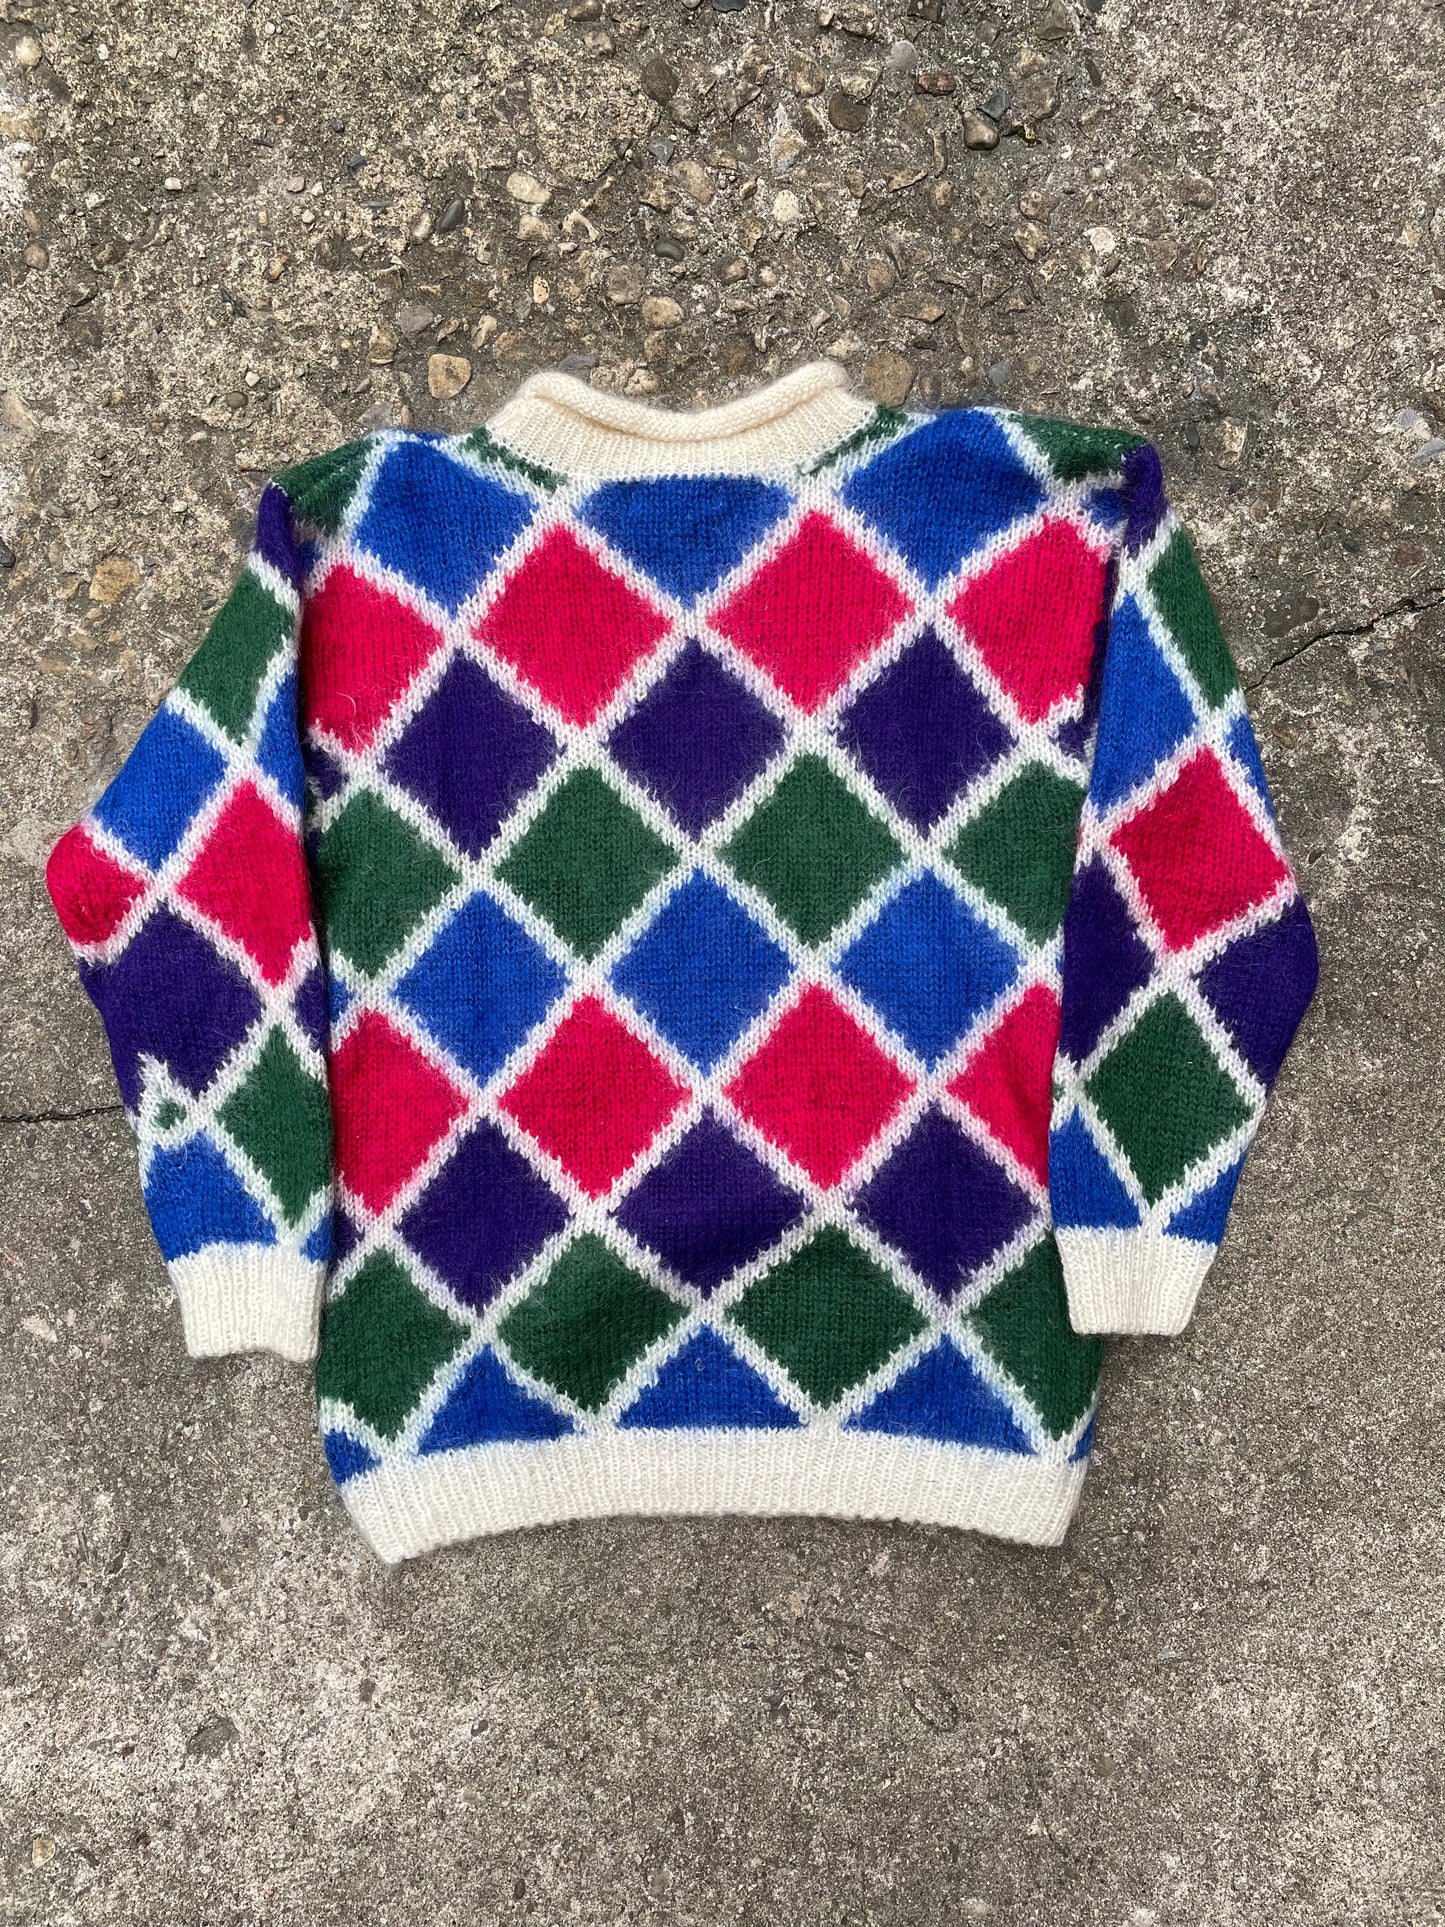 1970's Eaton Patterned Mohair Knit Sweater - M